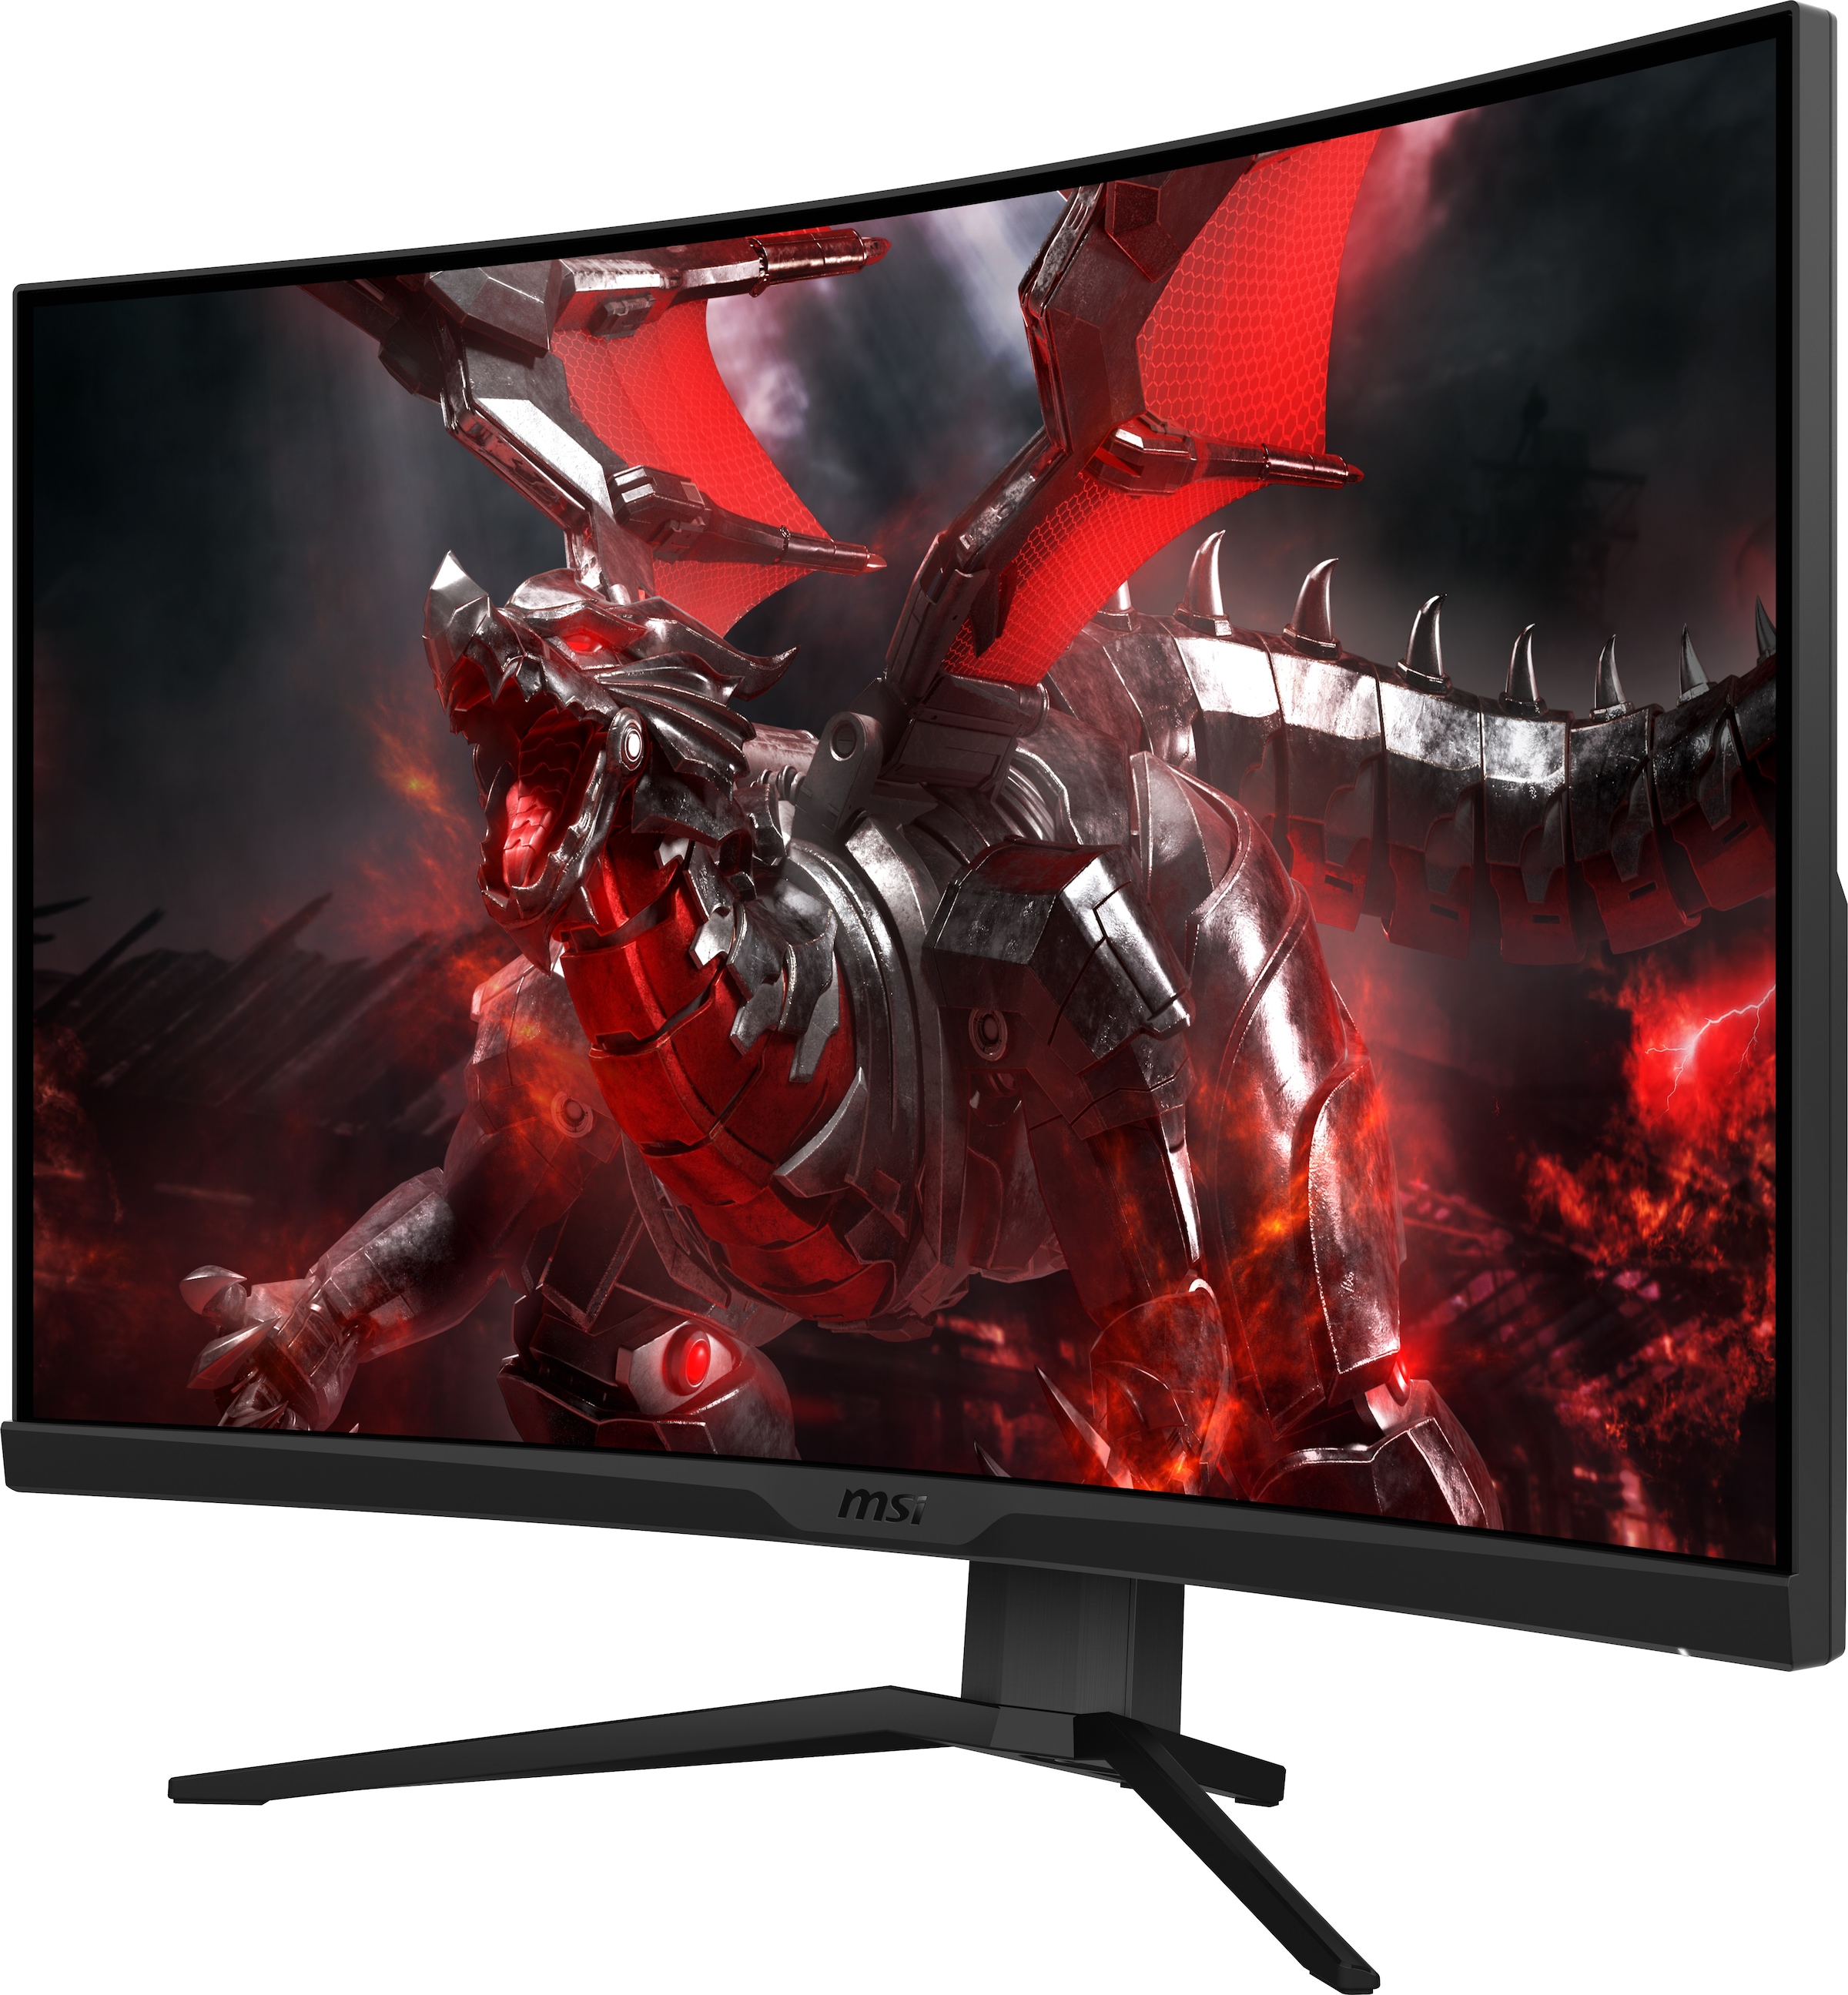 MSI Curved-Gaming-LED-Monitor »G322CQP«, 80 cm/31,5 Zoll, 2560 x 1440 px, WQHD, 1 ms Reaktionszeit, 170 Hz